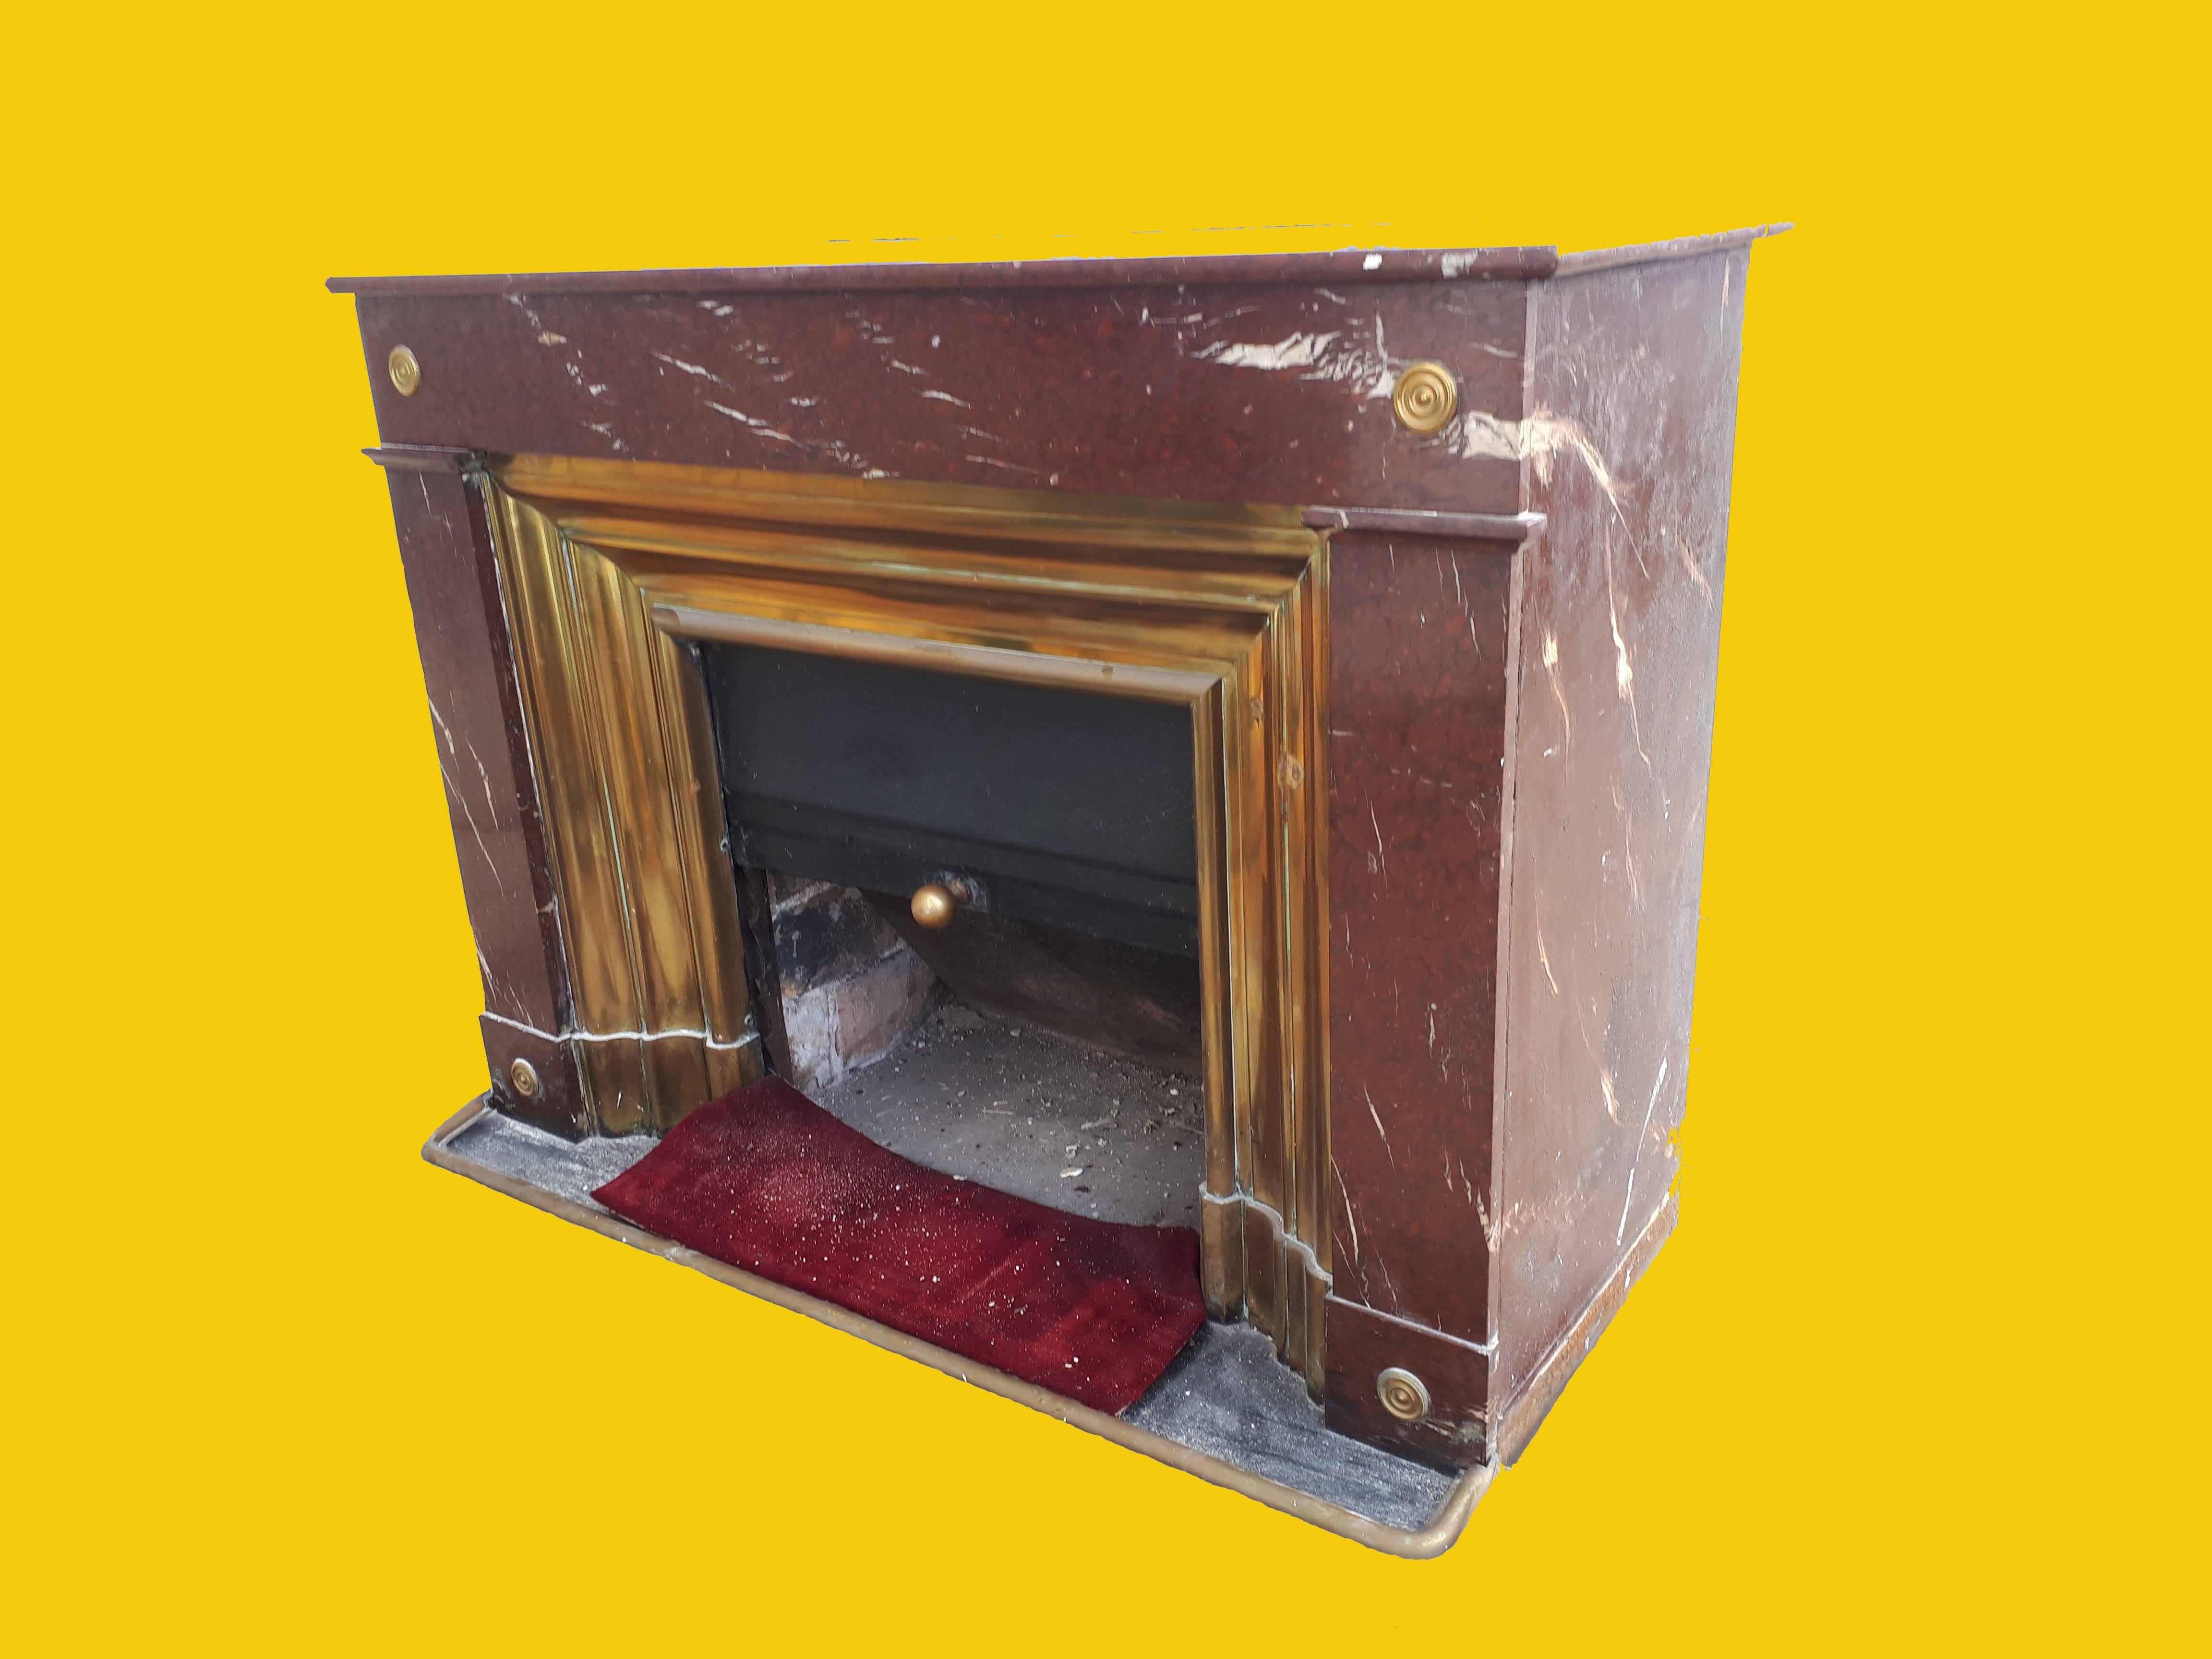 A most unusual and rare red and cream flecked marble fireplace circa 1890 with brass molded inserts and a slide to cover the opening when not in use.